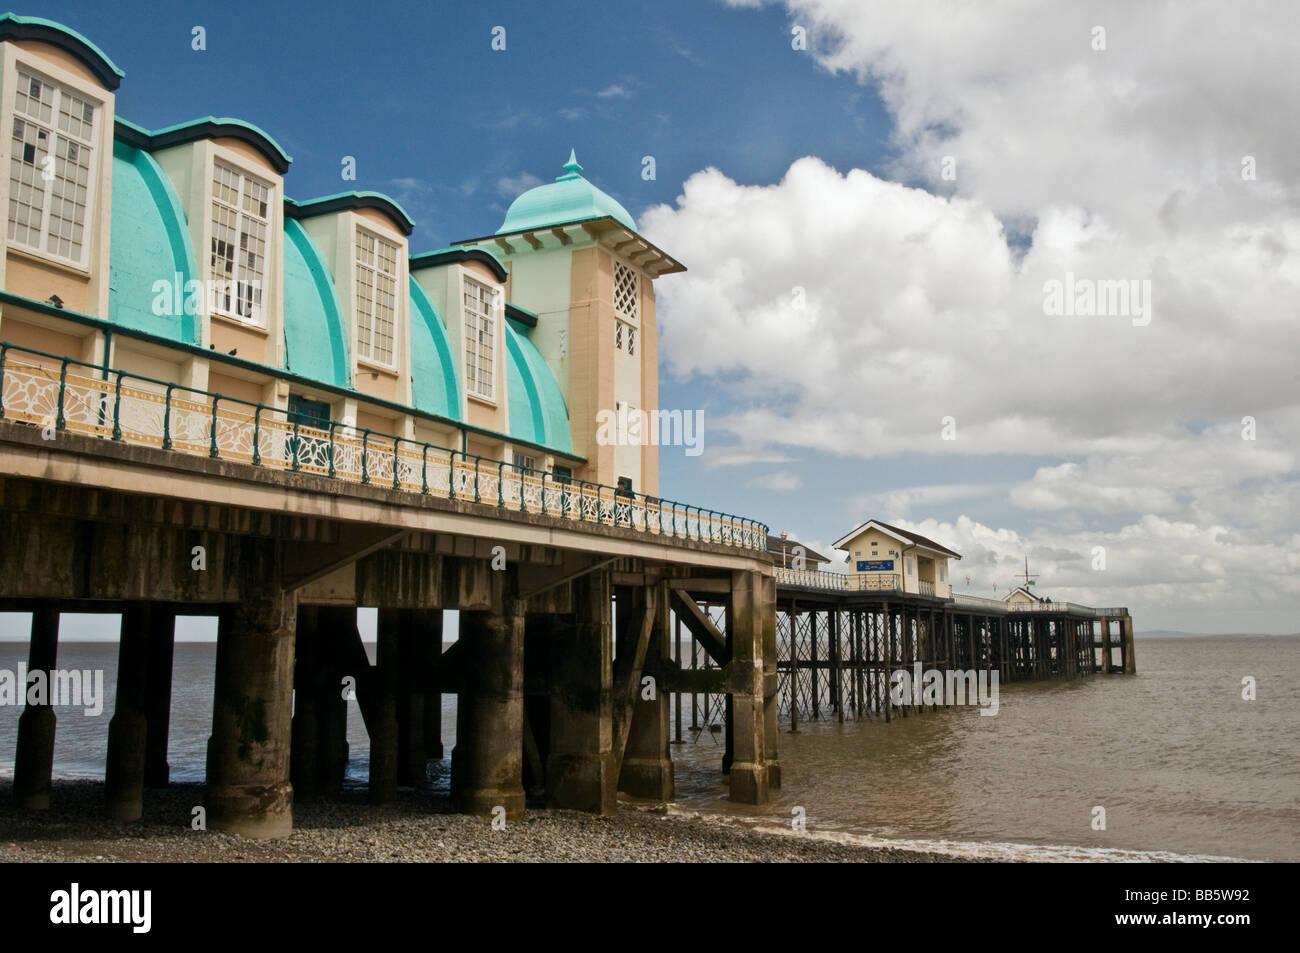 The old Penarth Pier in south Wales prior to the 2014 refurbishment when it was upgraded and refurbished. Stock Photo